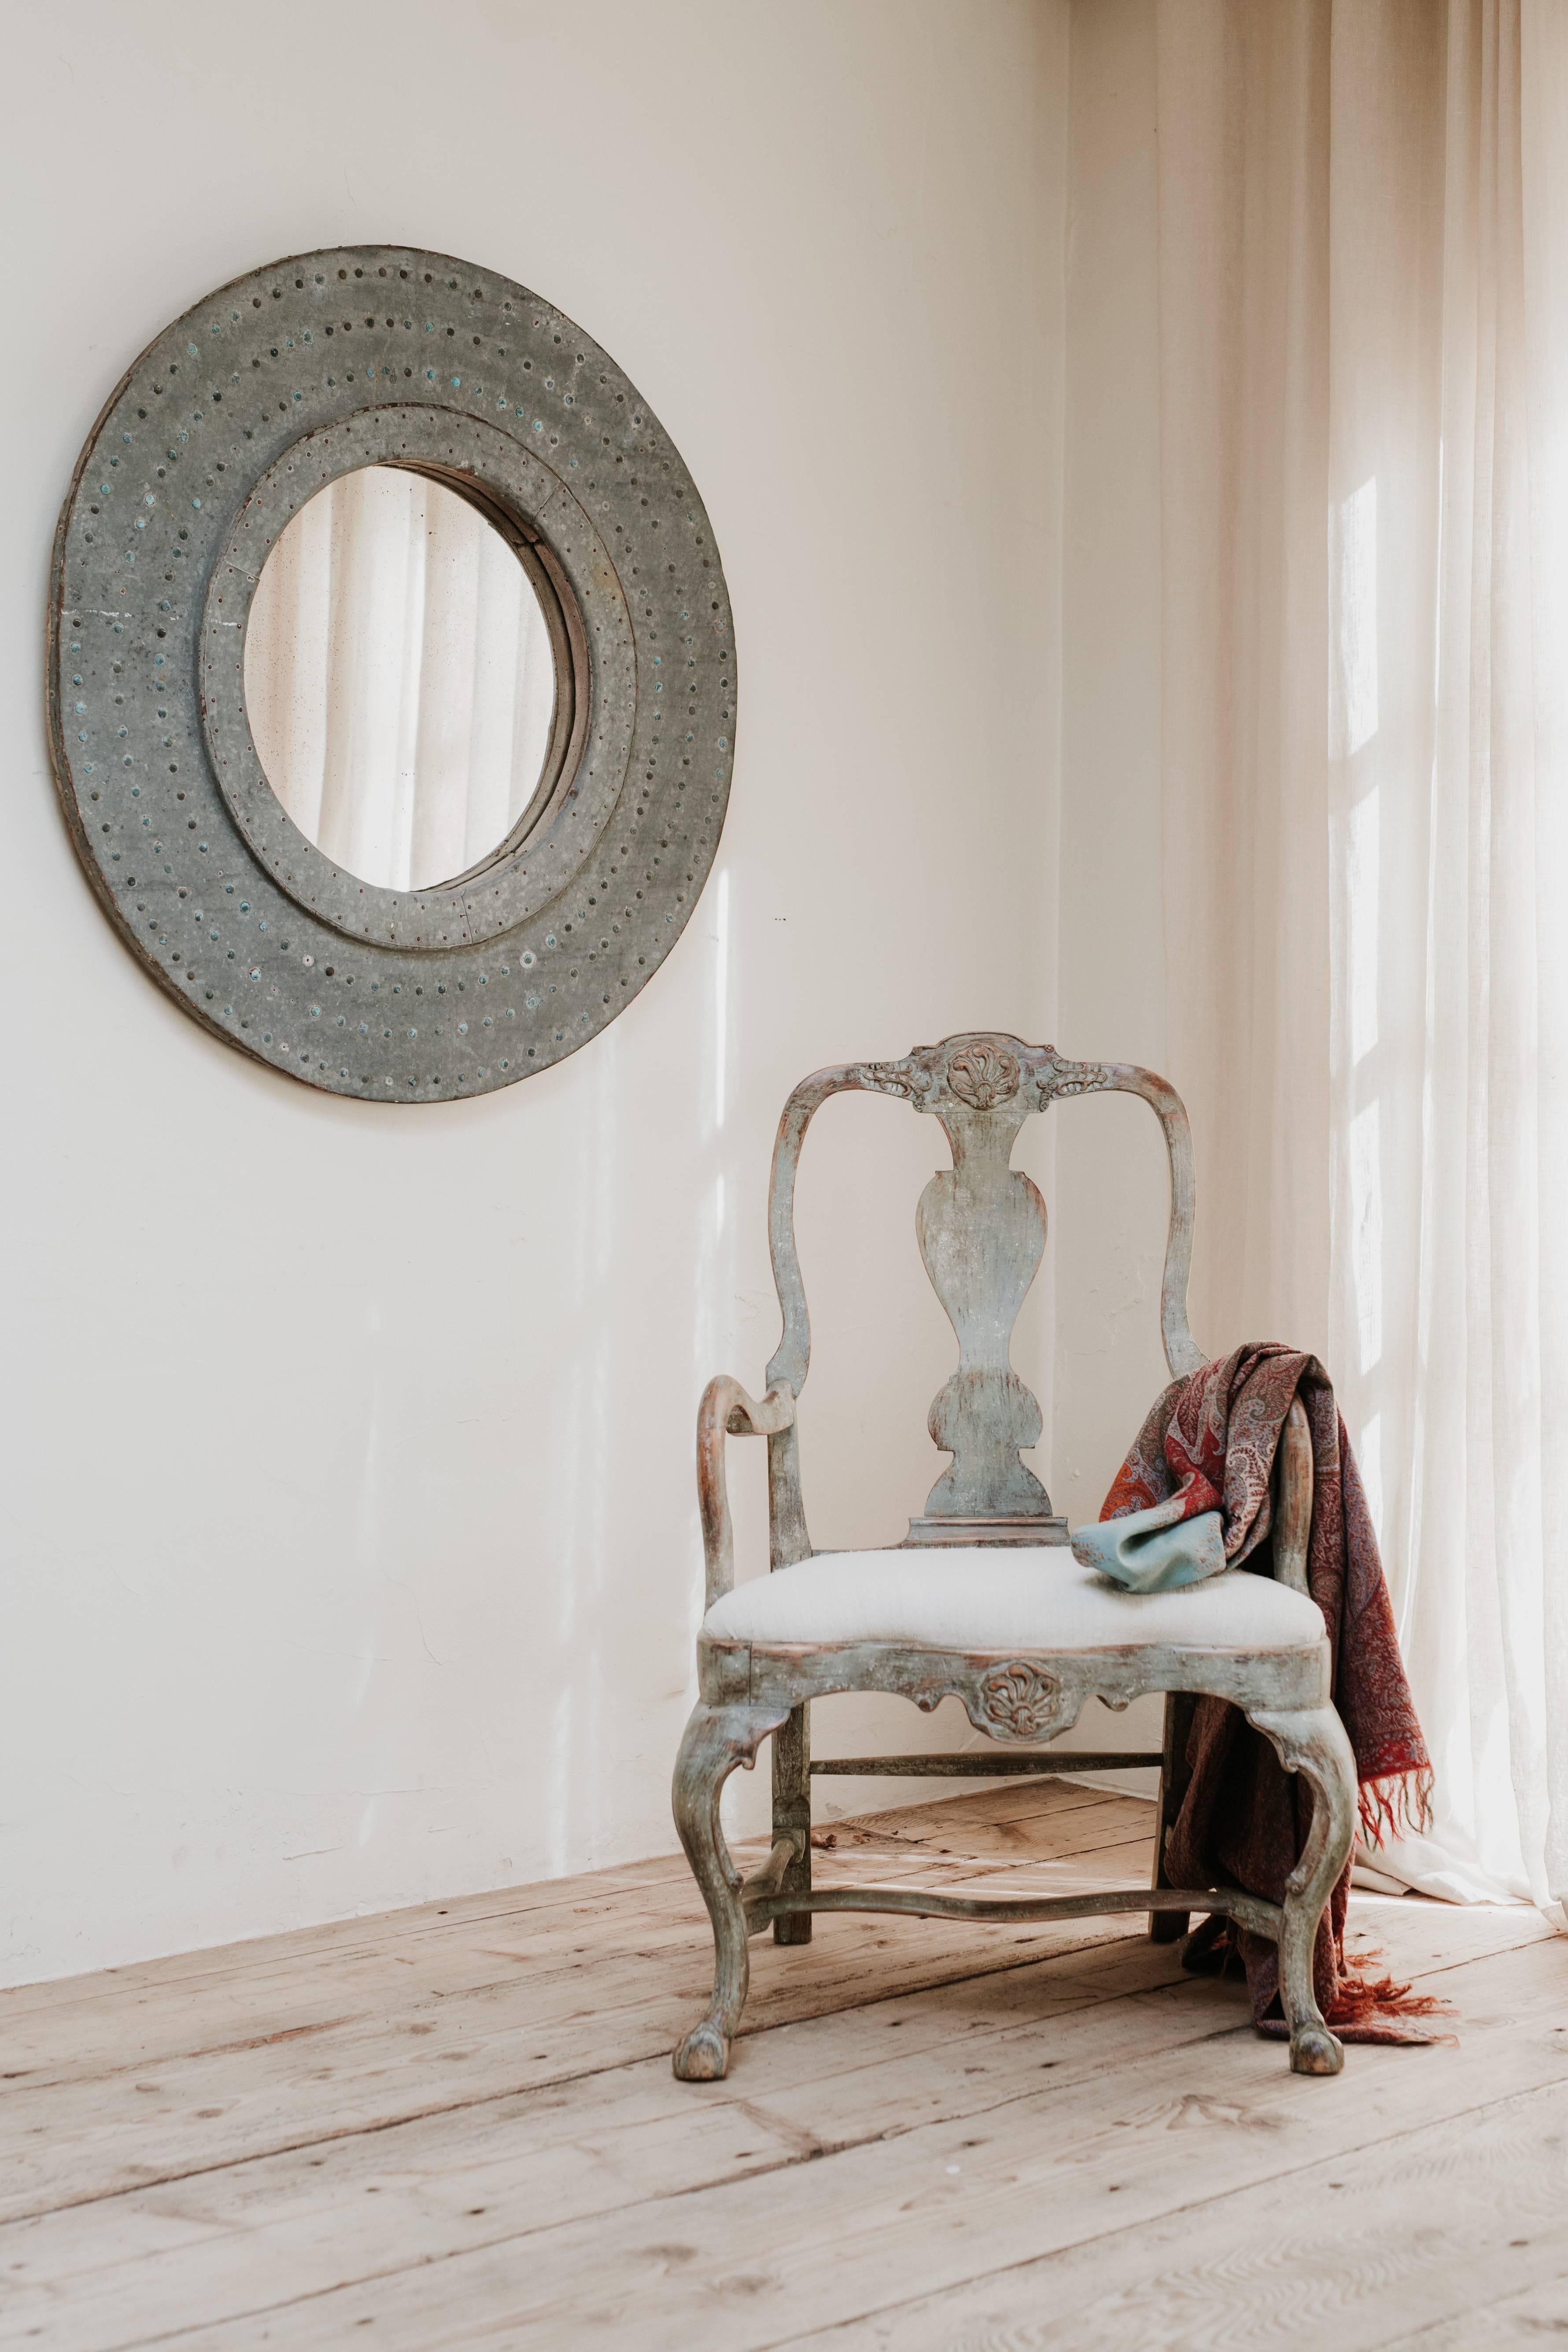 Sweden at its best, this 18th century Rococo armchair with old blue paint.